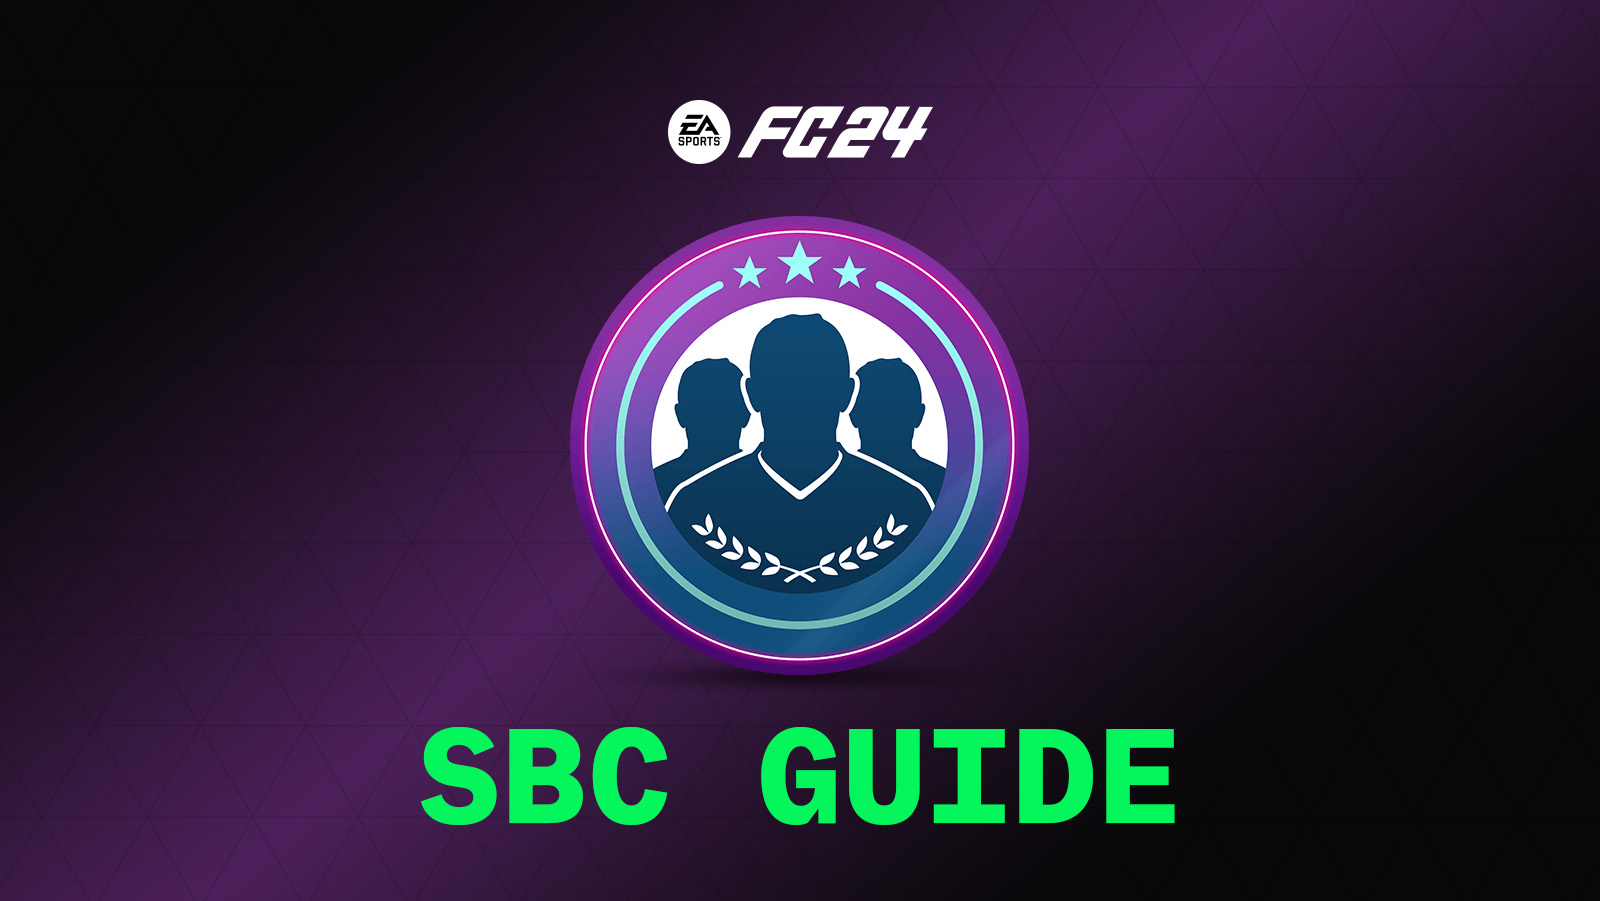 FC 24 SBC Solution Guide